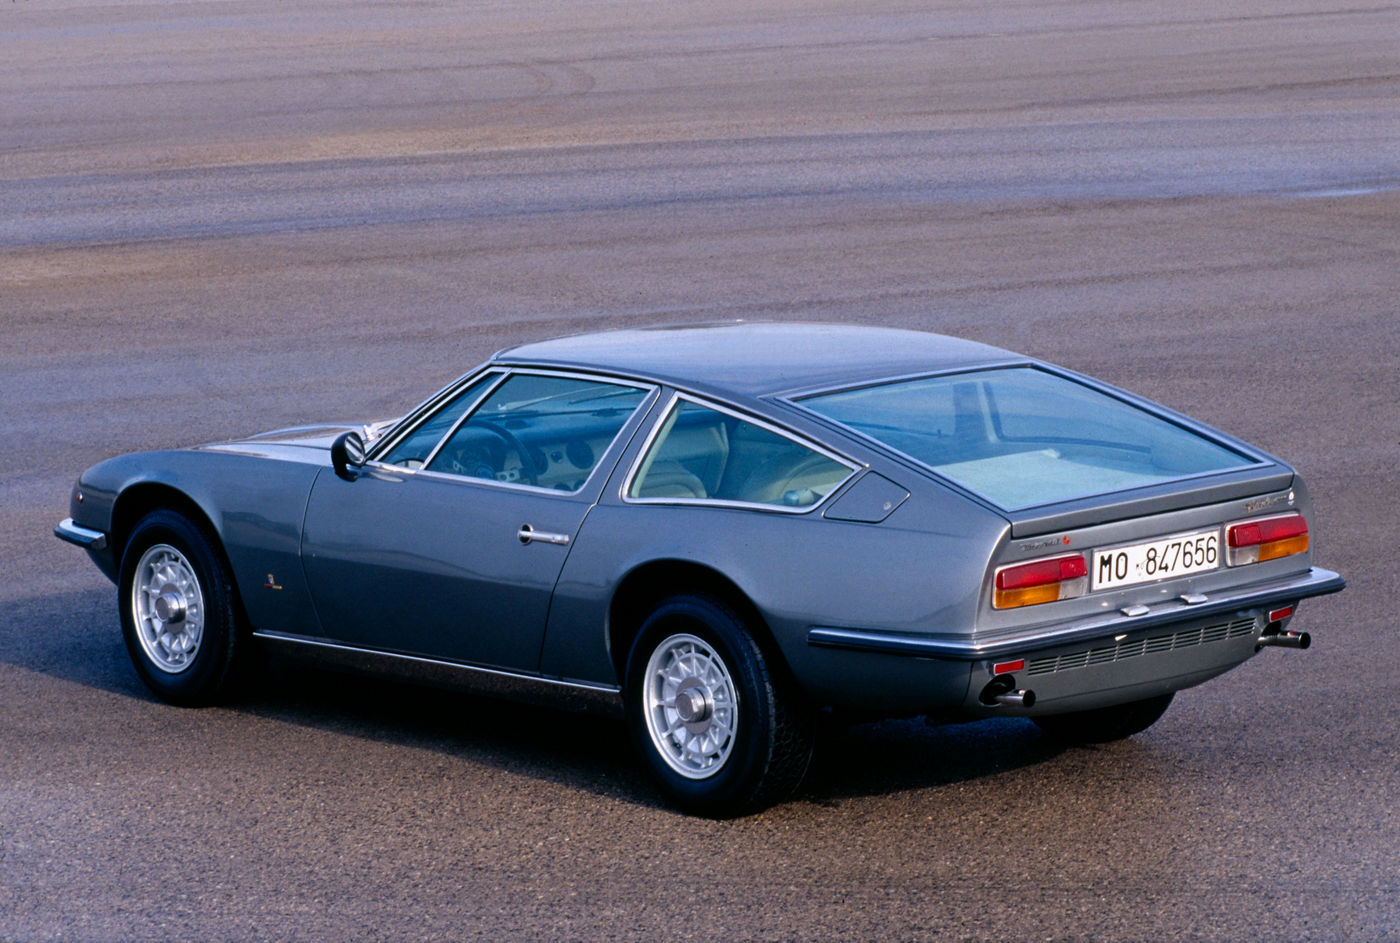 1969 Maserati Indy - exterior view of the classic 4-seater coupe